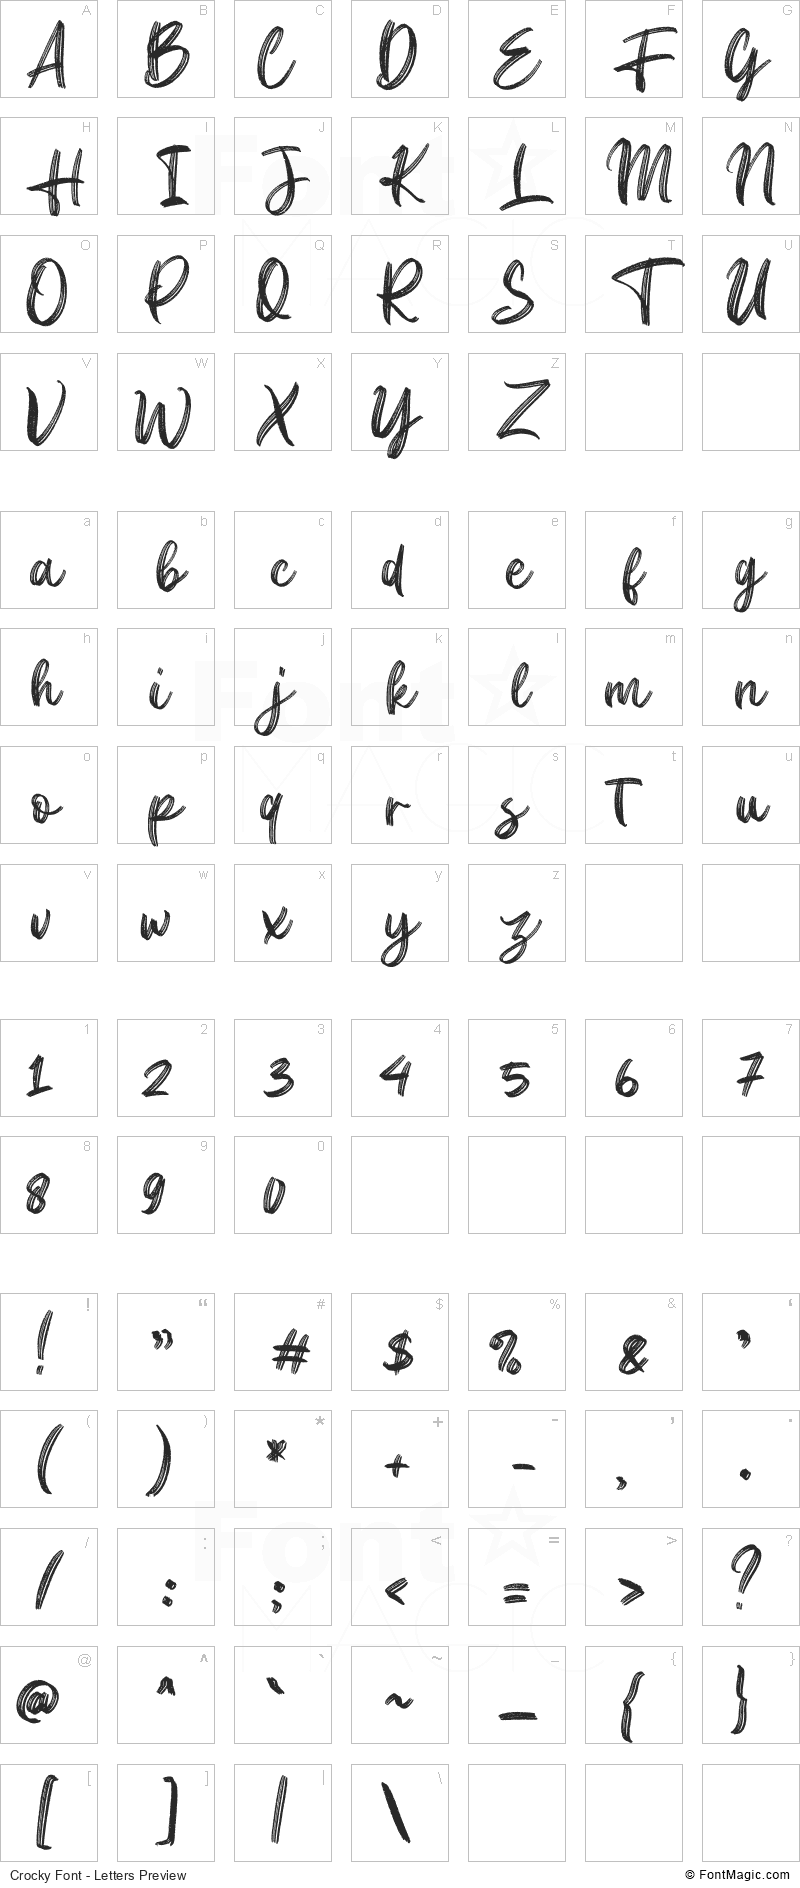 Crocky Font - All Latters Preview Chart